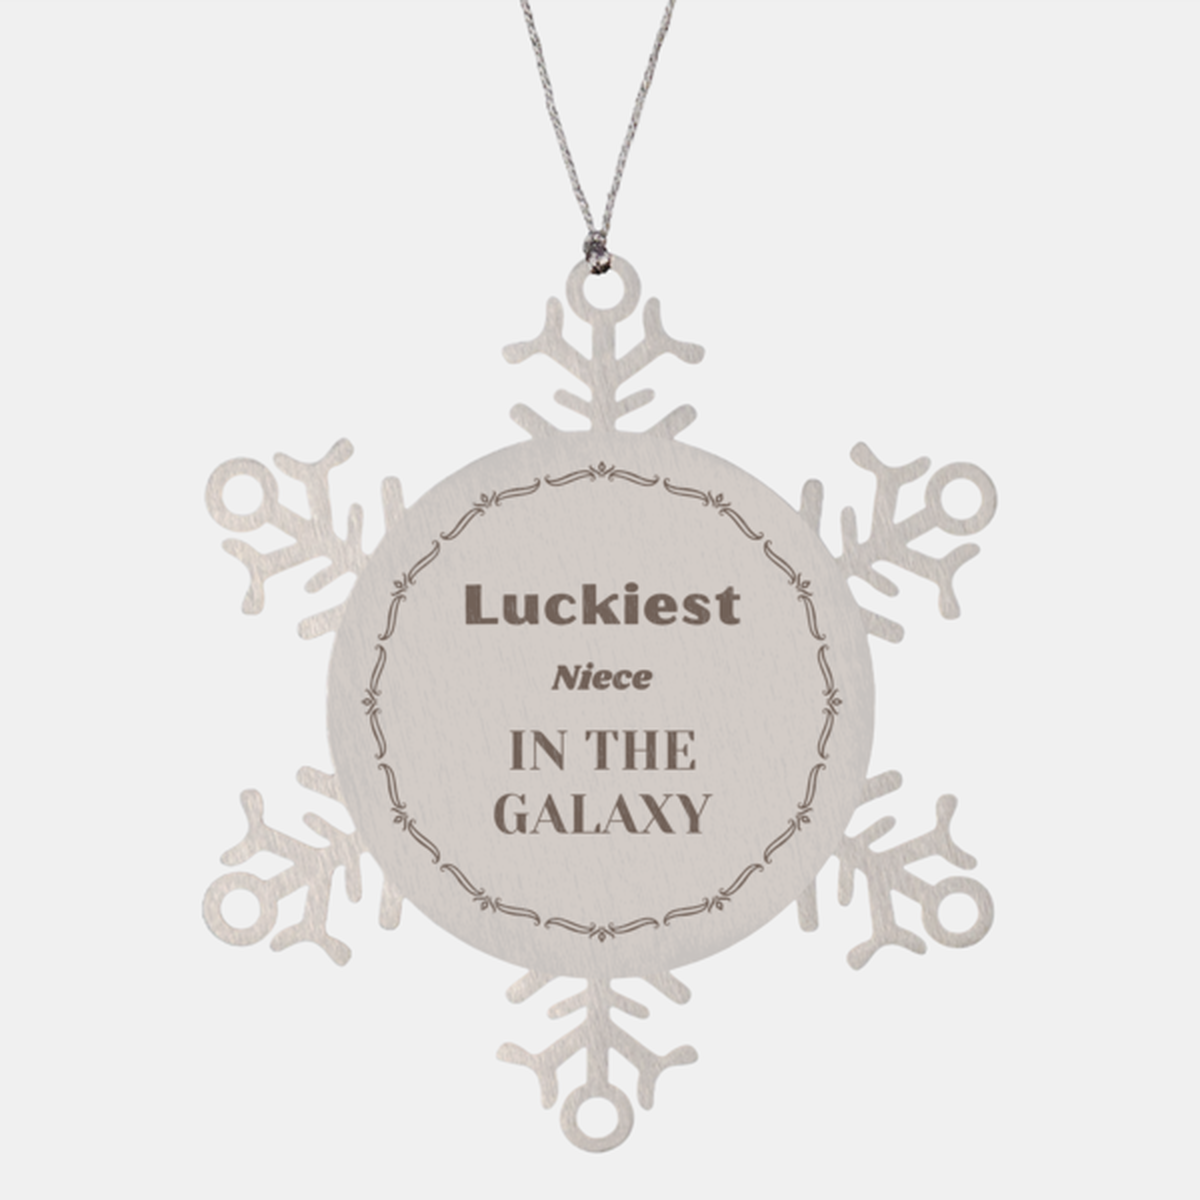 Luckiest Niece in the Galaxy, To My Niece Ornament Gifts, Christmas Niece Snowflake Ornament Gifts, X-mas Decorations Unique Gifts For Niece Men Women